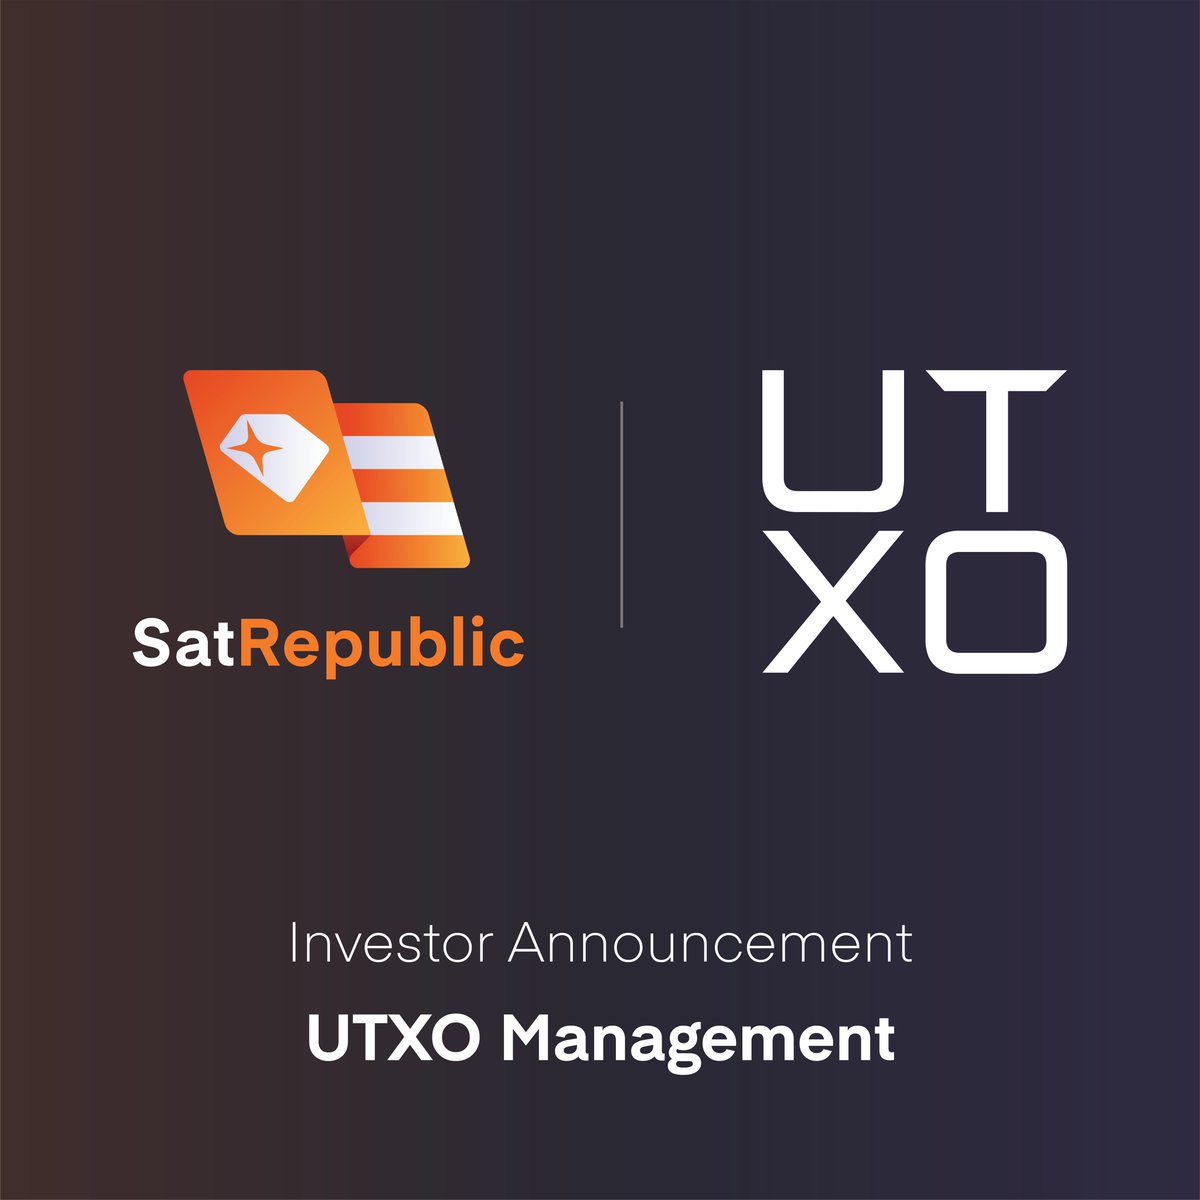 The parent company behind Runevo, @SatRepublic, has closed funding from one of the leading investors in the BTC ecosystem: @UTXOmgmt, the investment arm of @_btcinc. This is in addition to other epic investors who will be in a full funding announcement. a thread 🧵